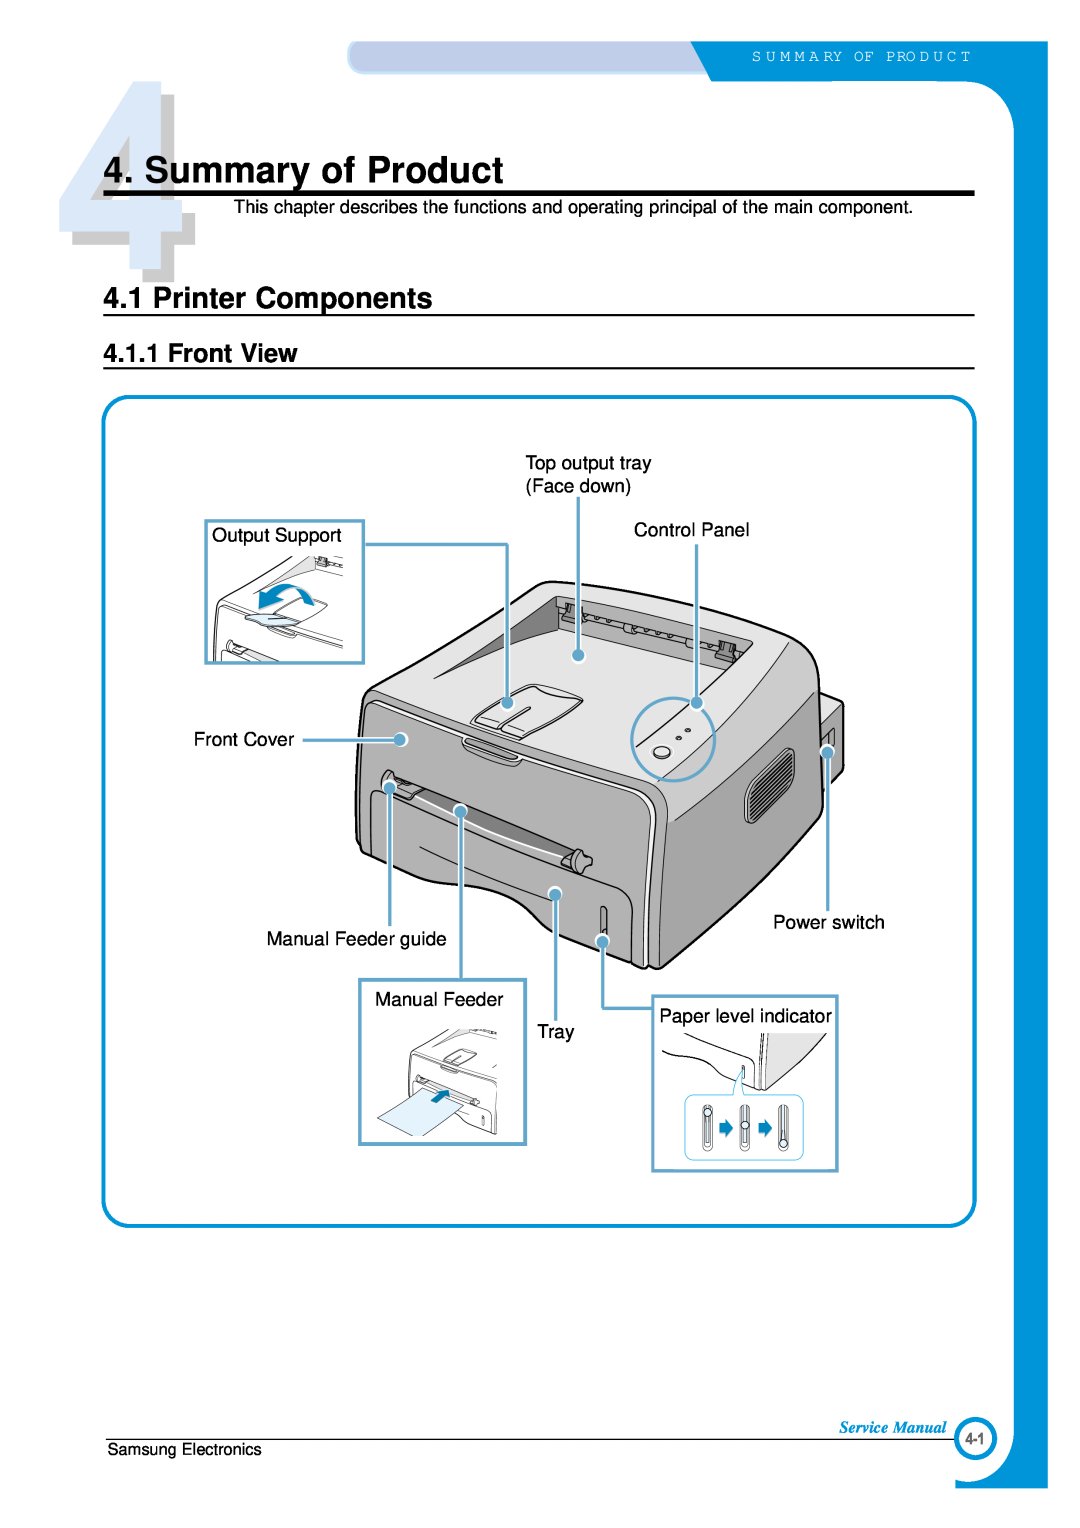 Samsung ML-1700 Summary of Product, Printer Components, Front View, Top output tray Face down, Output Support 